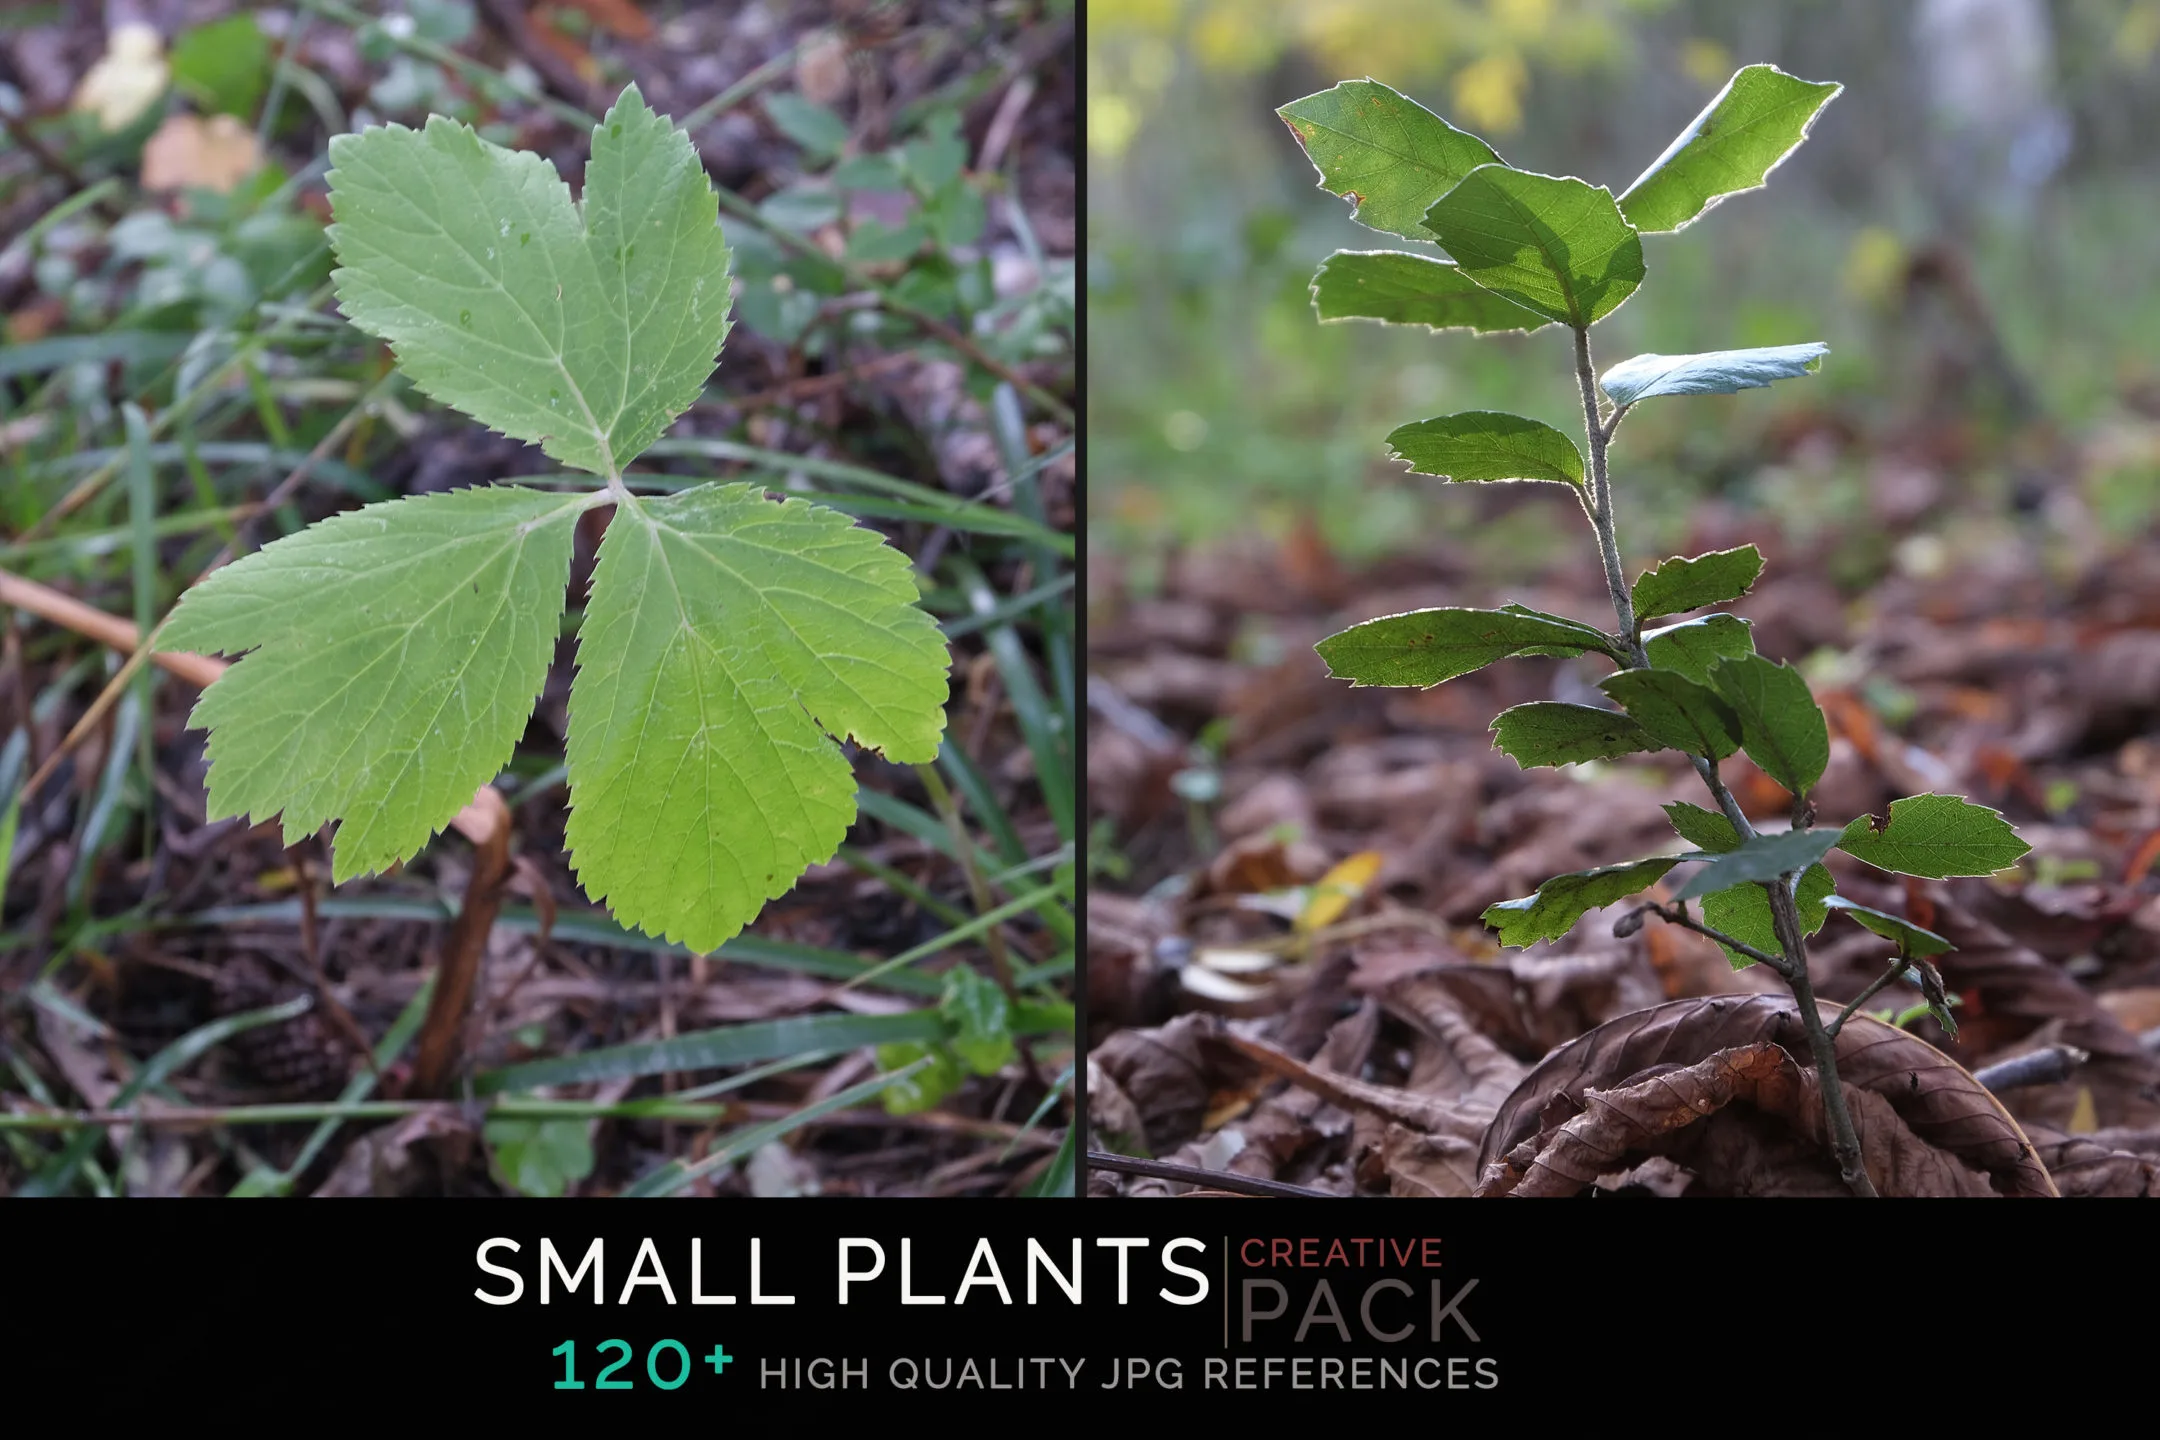 Small Plants CREATIVE PACK